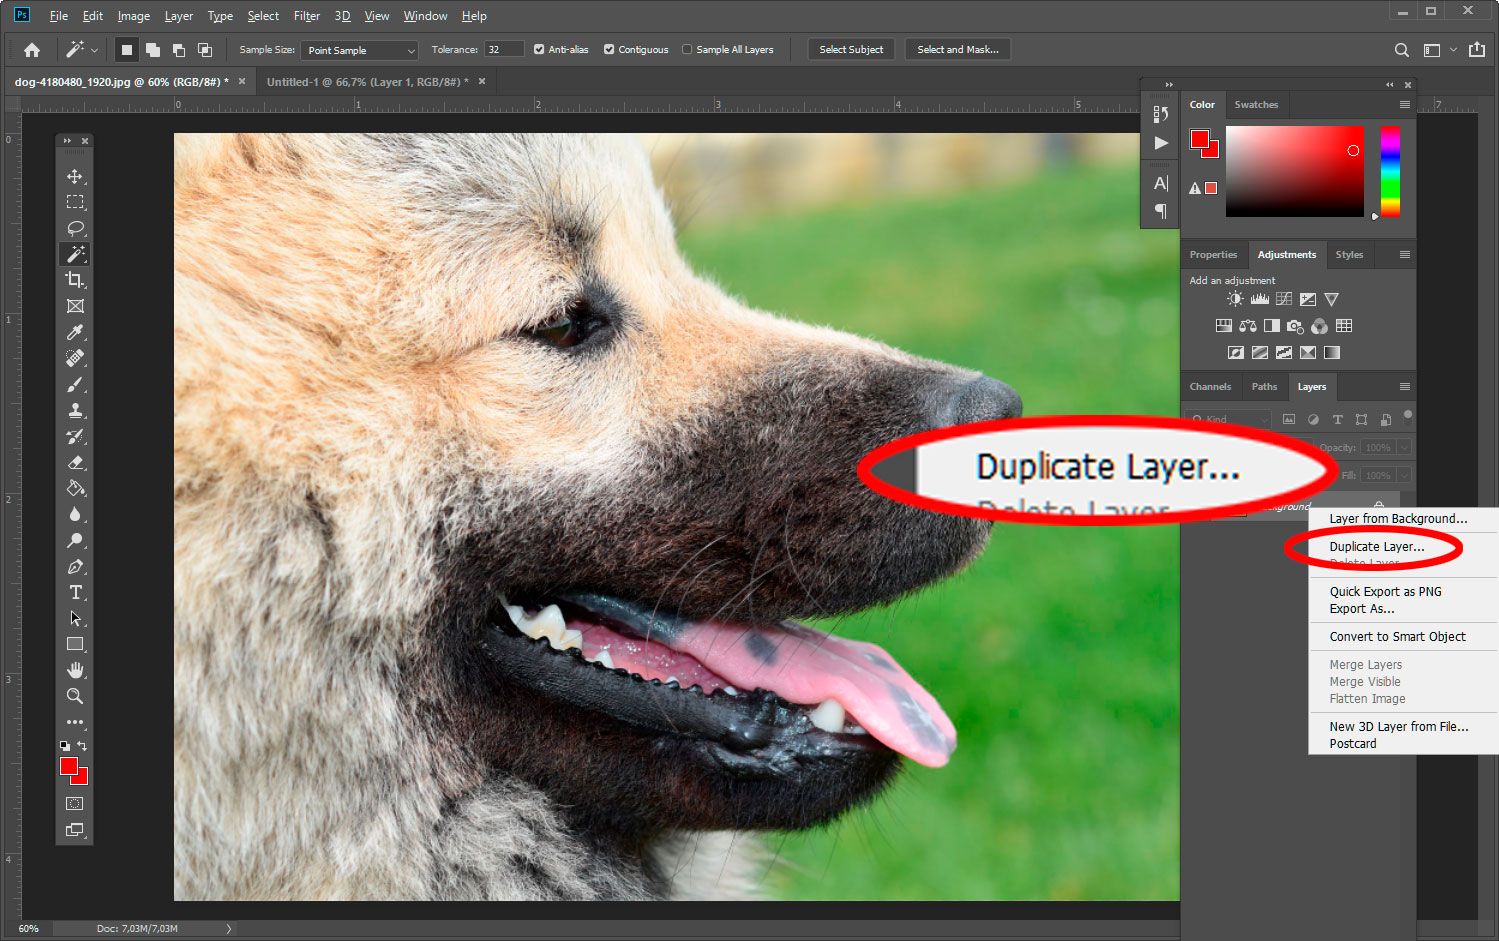 Duplicate Layer in Photoshop..